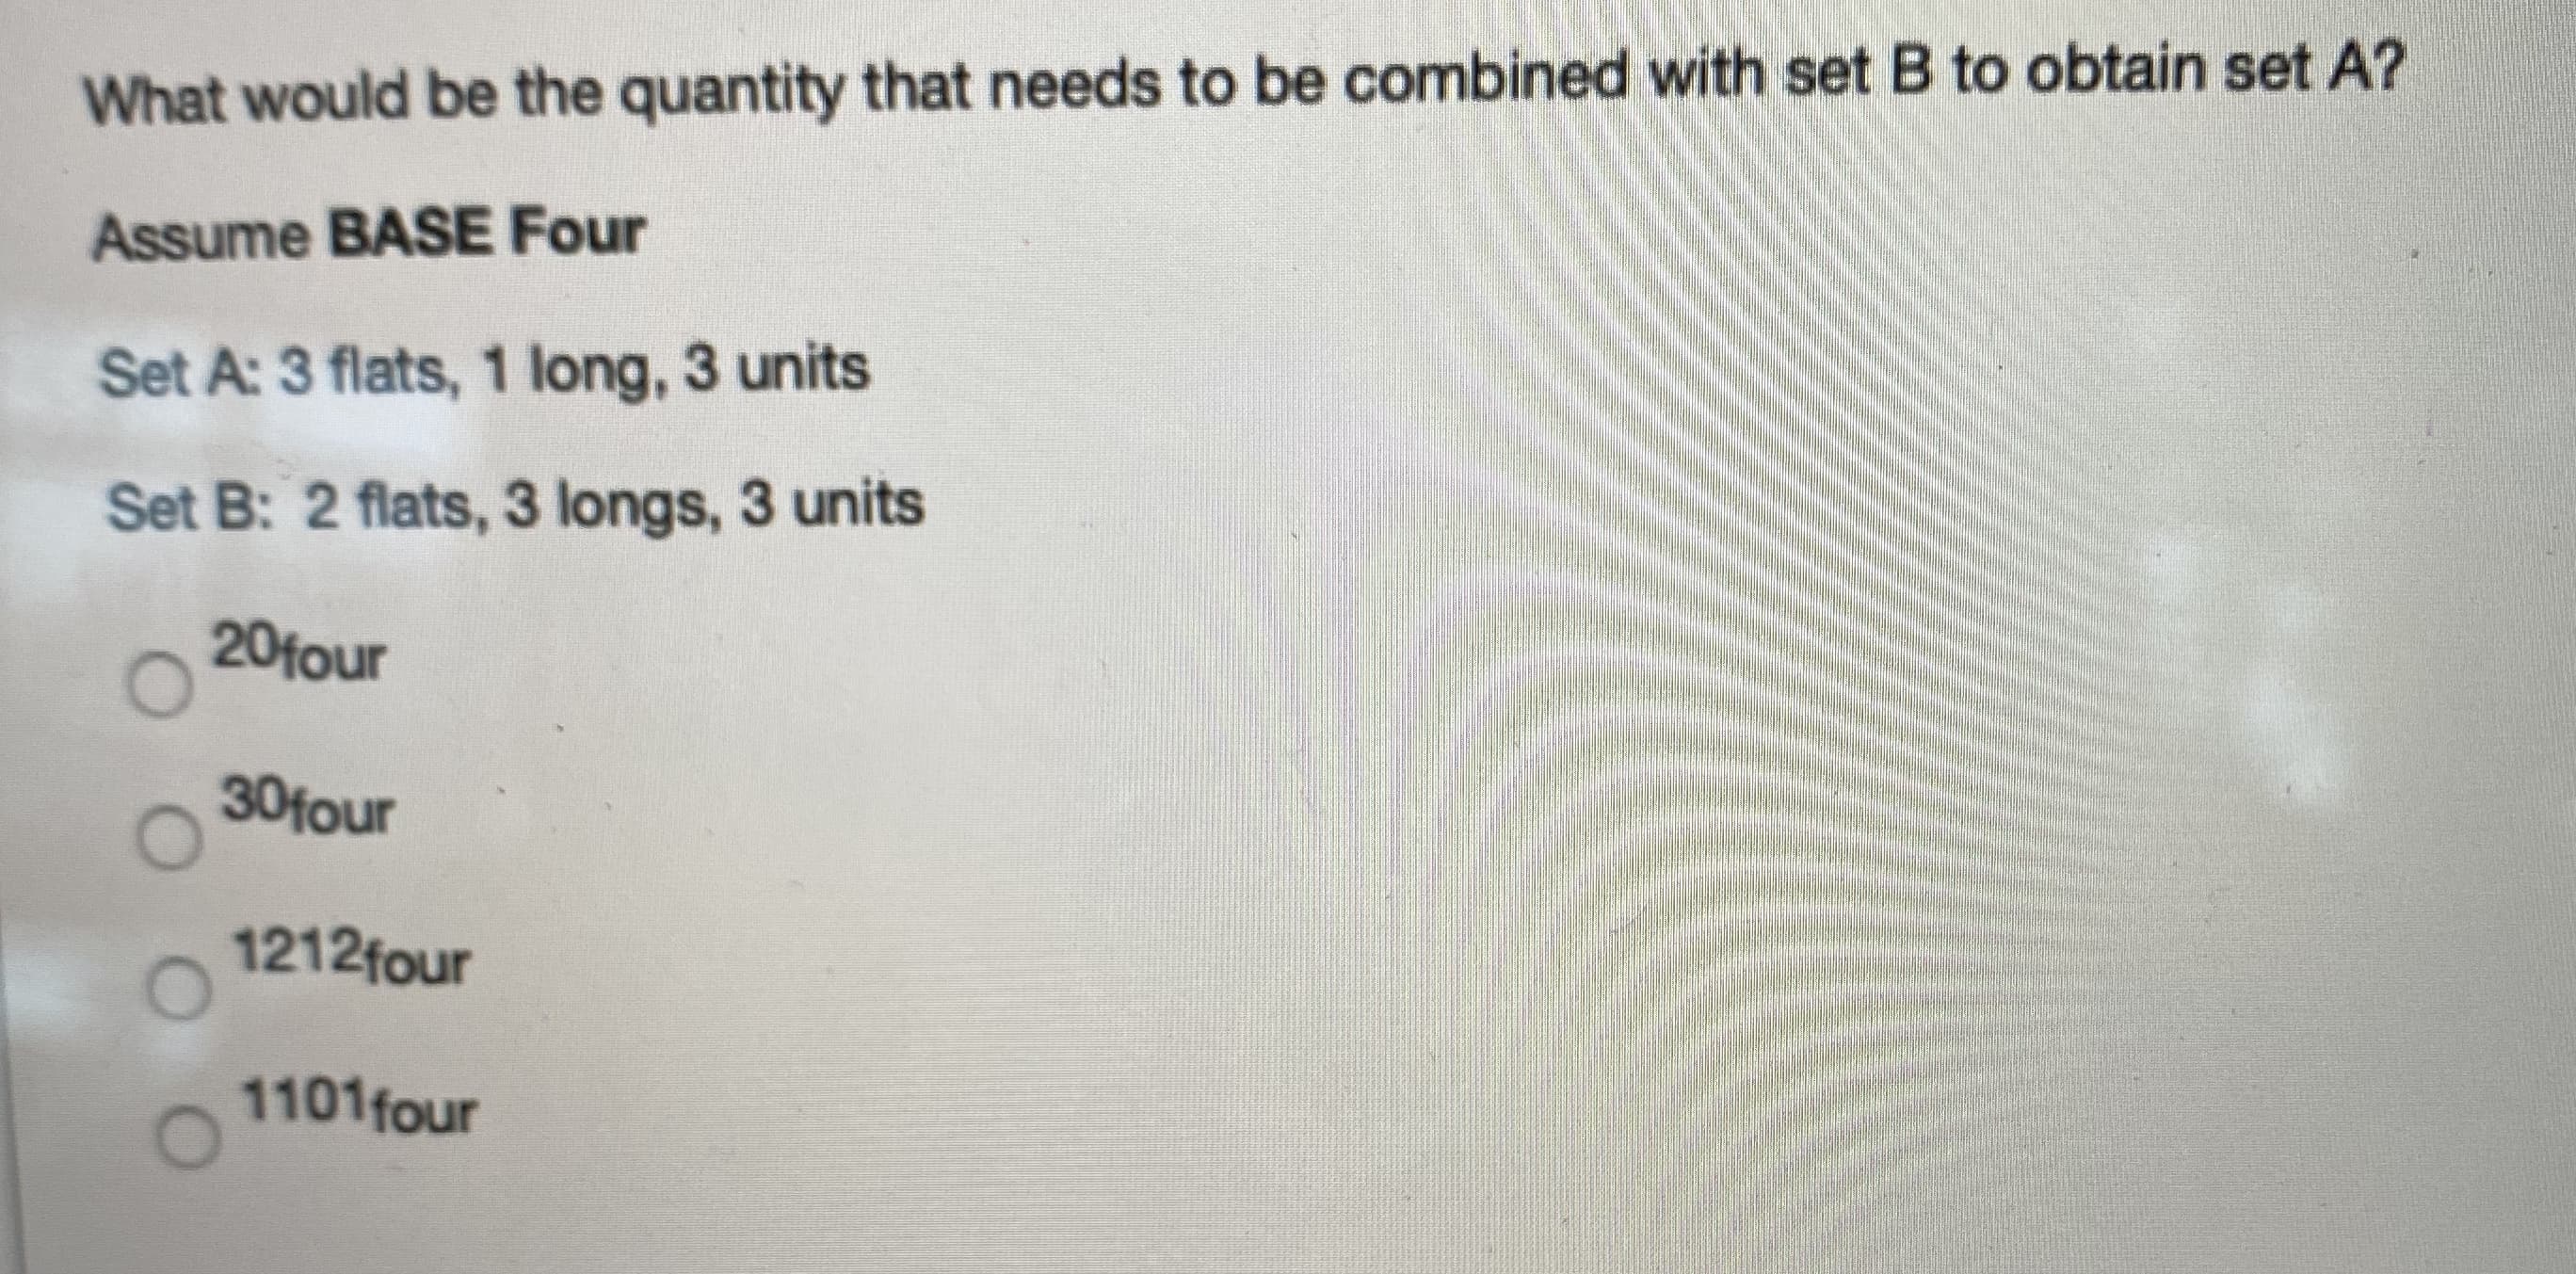 What would be the quantity that needs to be combined with set B to obtain set A?
Assume BASE Four
Set A: 3 flats, 1 long, 3 units
Set B: 2 flats, 3 longs, 3 units
